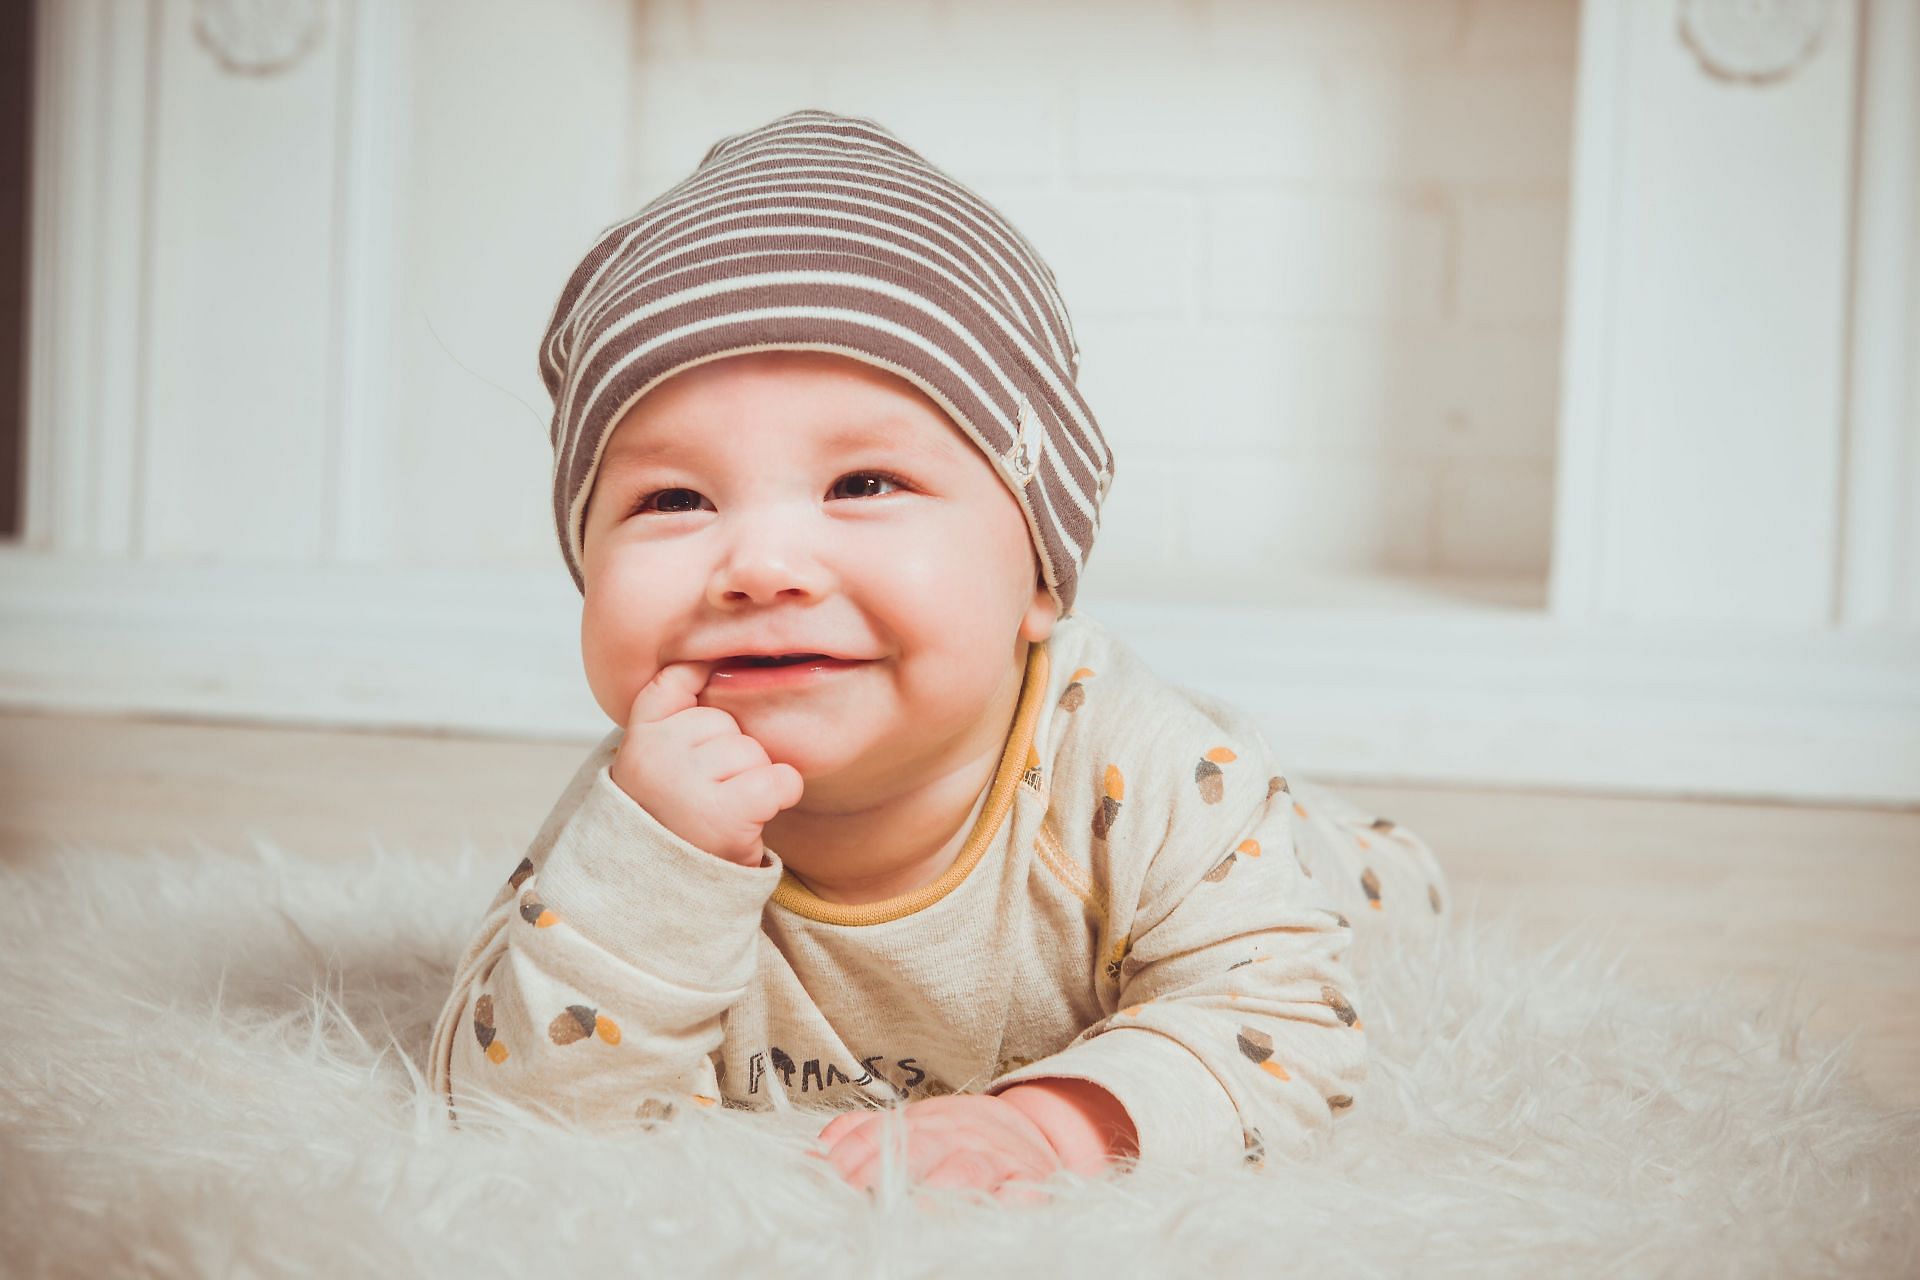 Teething and vomiting symptoms (image sourced via Pexels / Photo by Vika)